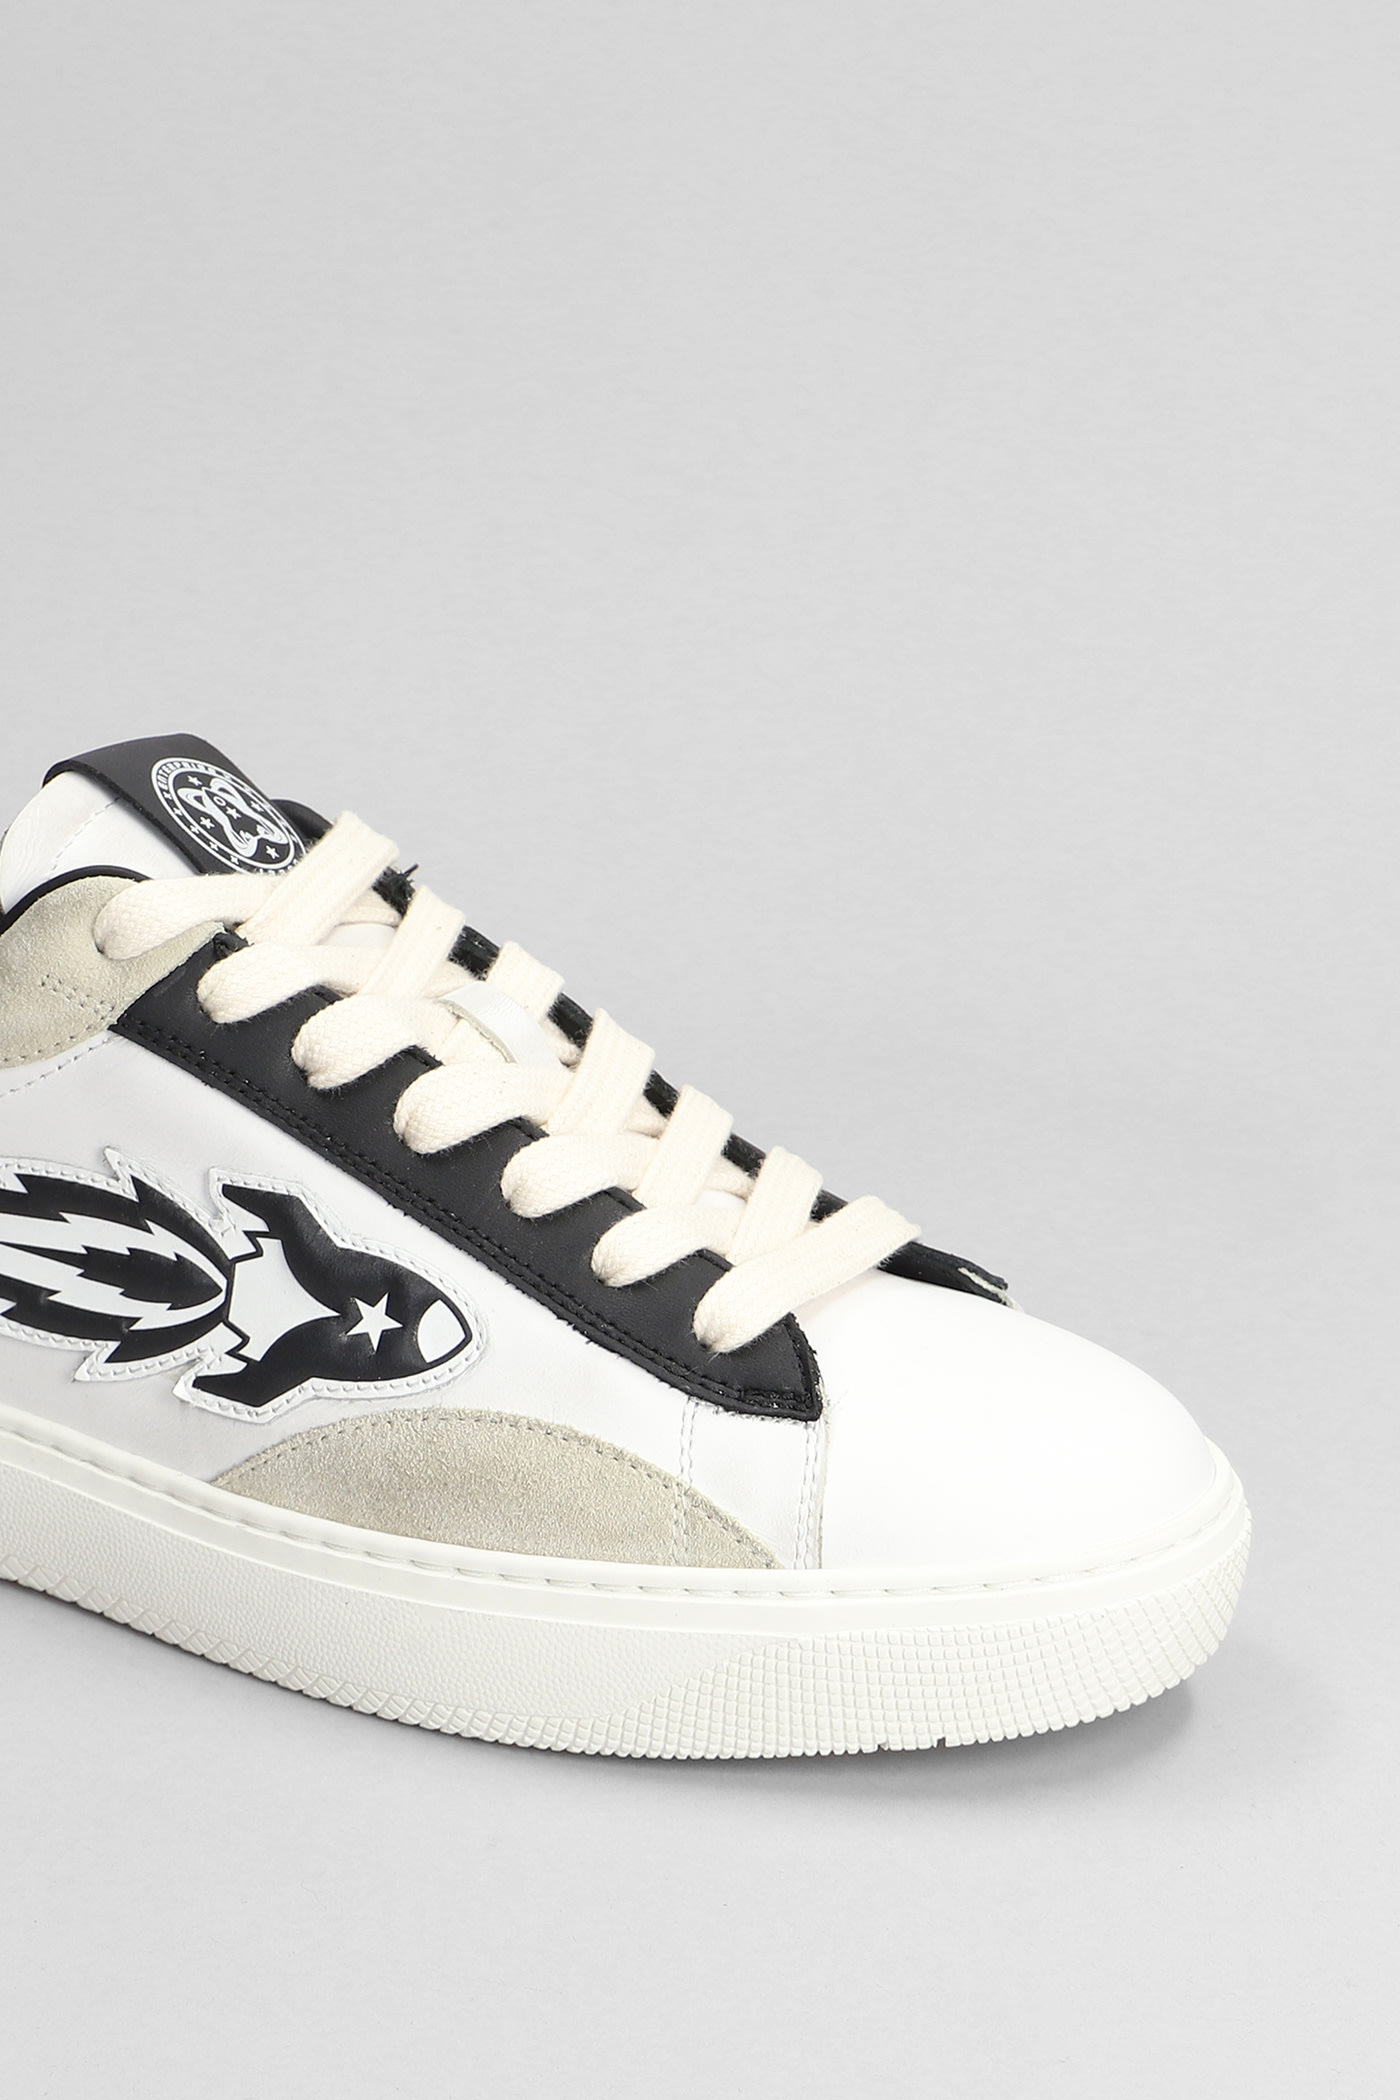 Shop Enterprise Japan Sneakers In White Suede And Leather